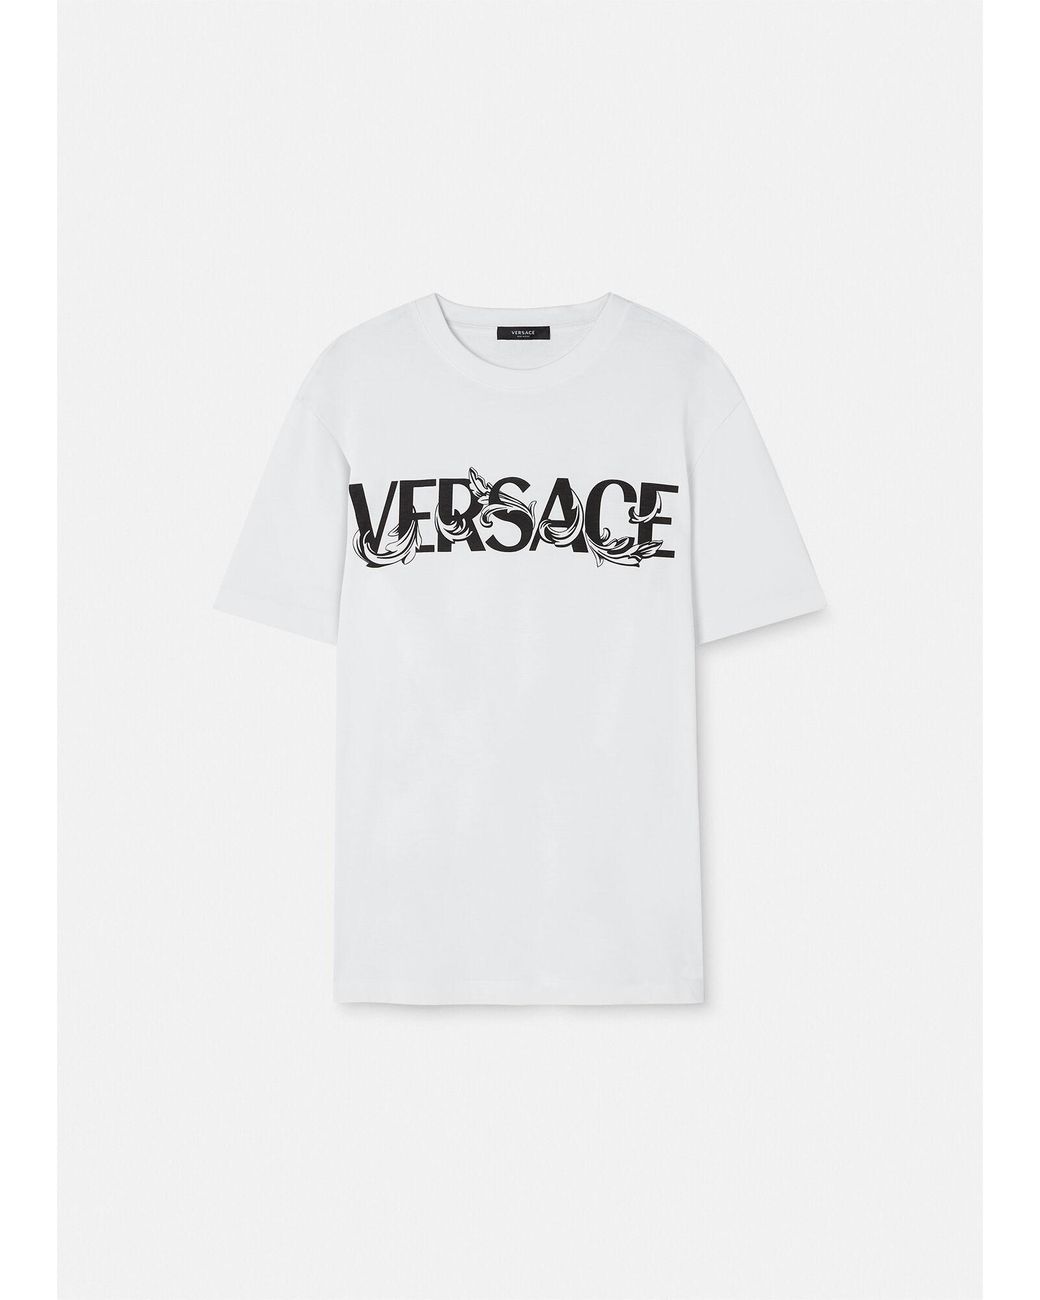 Versace Cotton Barocco Silhouette Logo T-shirt in White for Men | Lyst